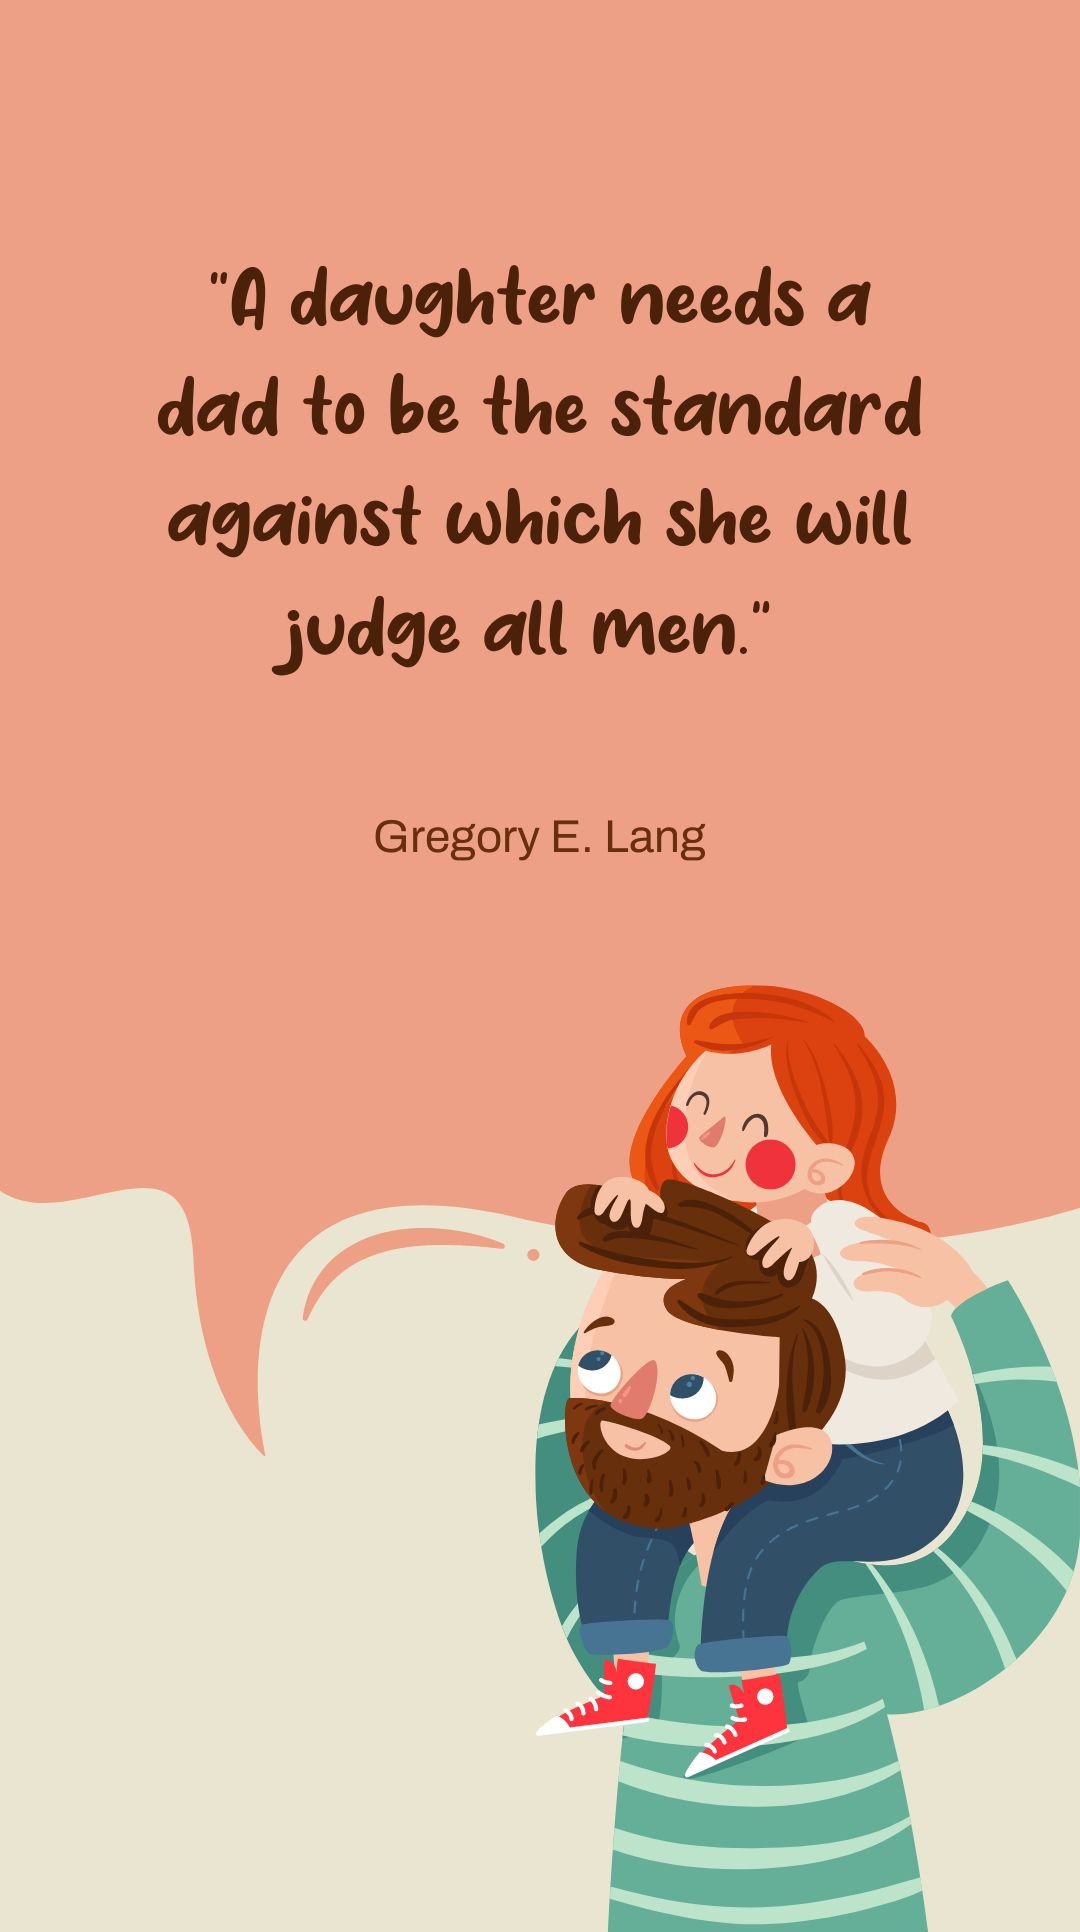 Free Gregory E. Lang - A daughter needs a dad to be the standard against which she will judge all men.